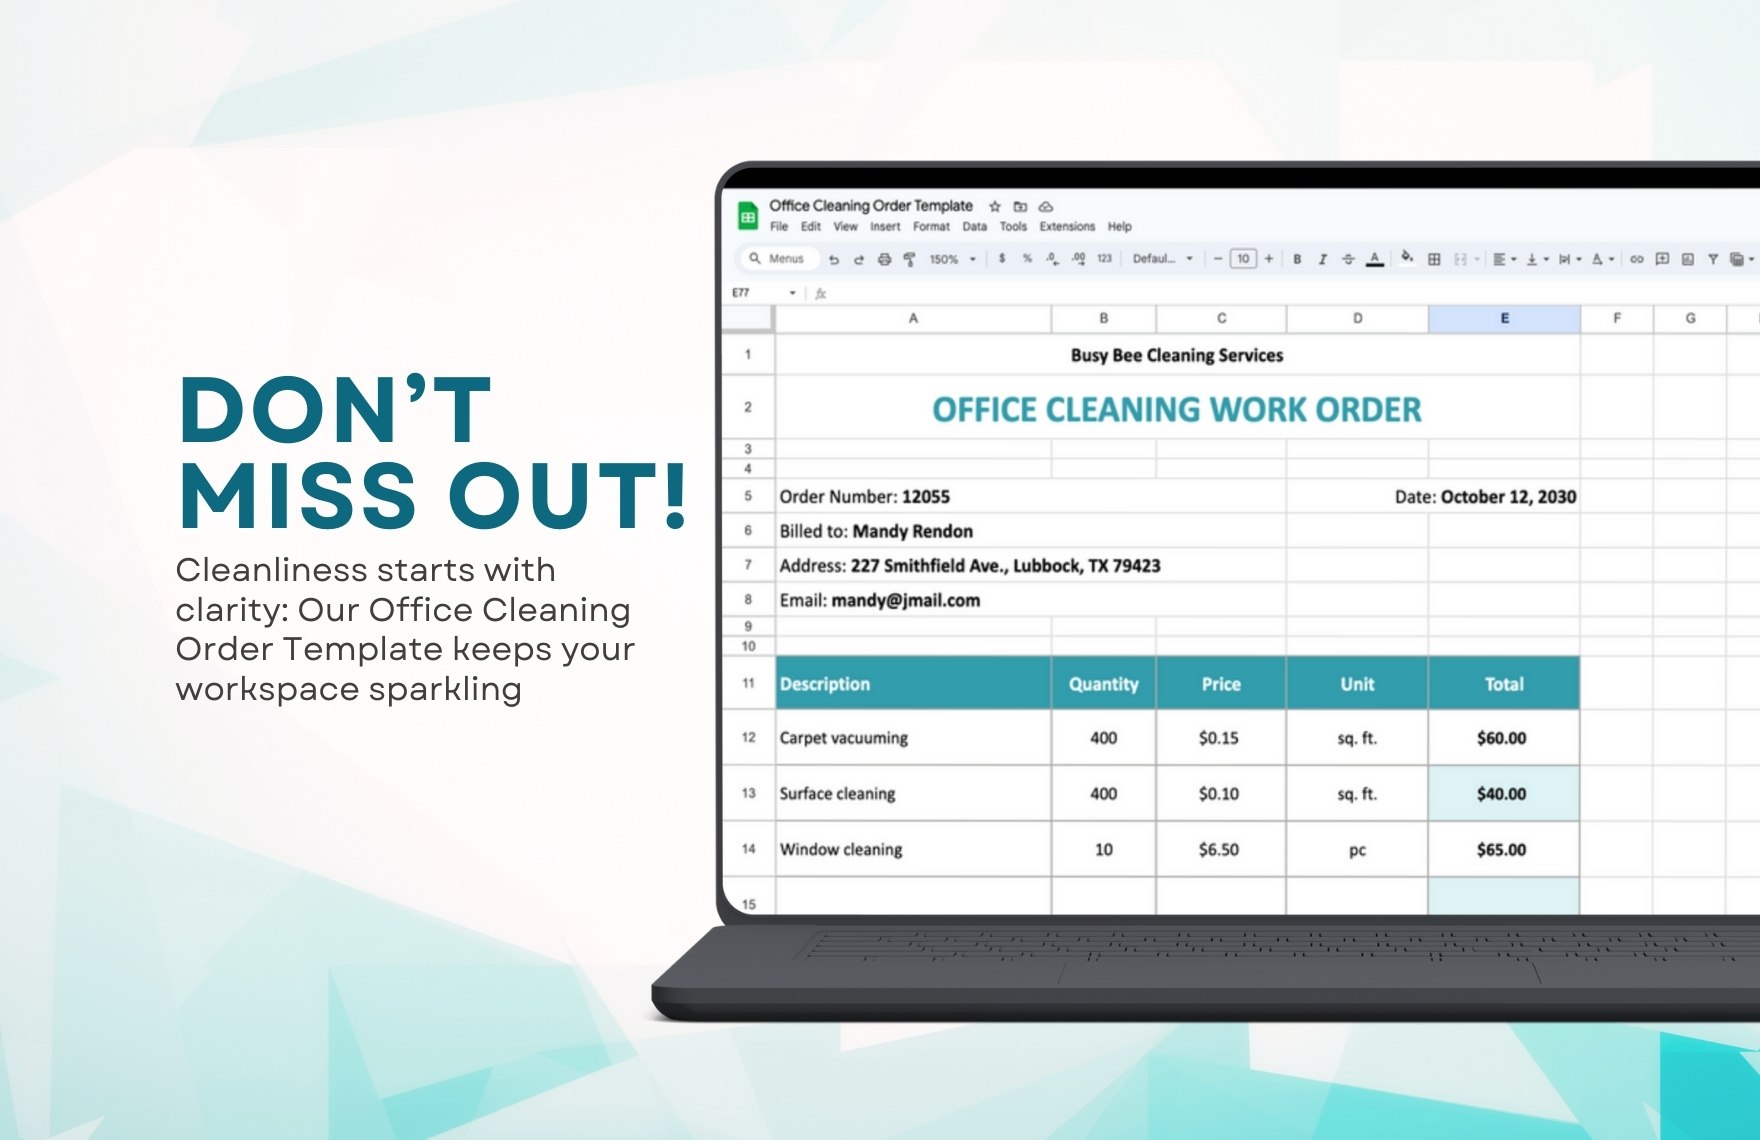 Office Cleaning Order Template